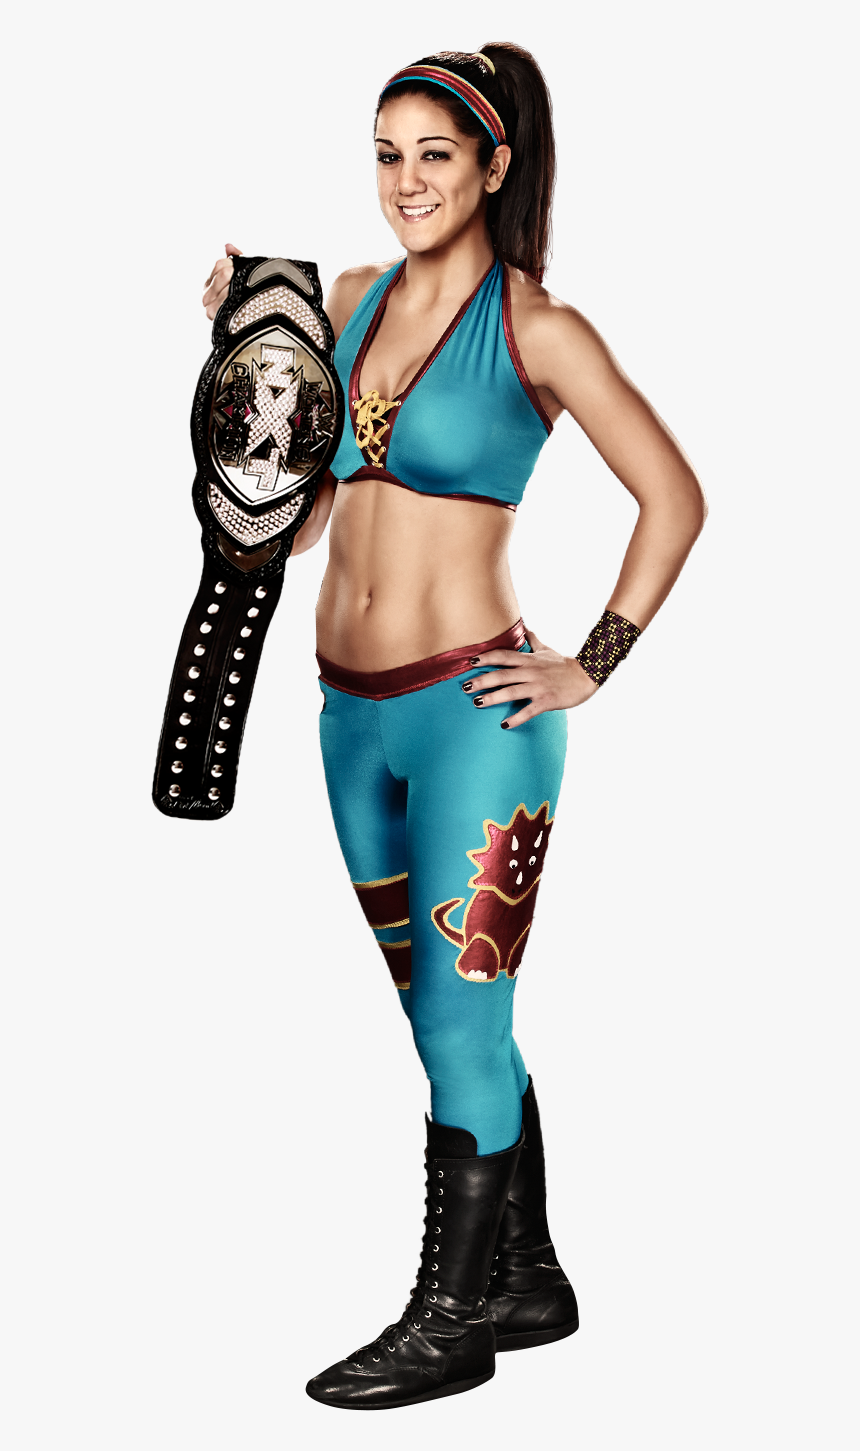 Bayley Nxt Women"s Championship , Png Download - Bayley Wwe Nxt Champion, Transparent Png, Free Download